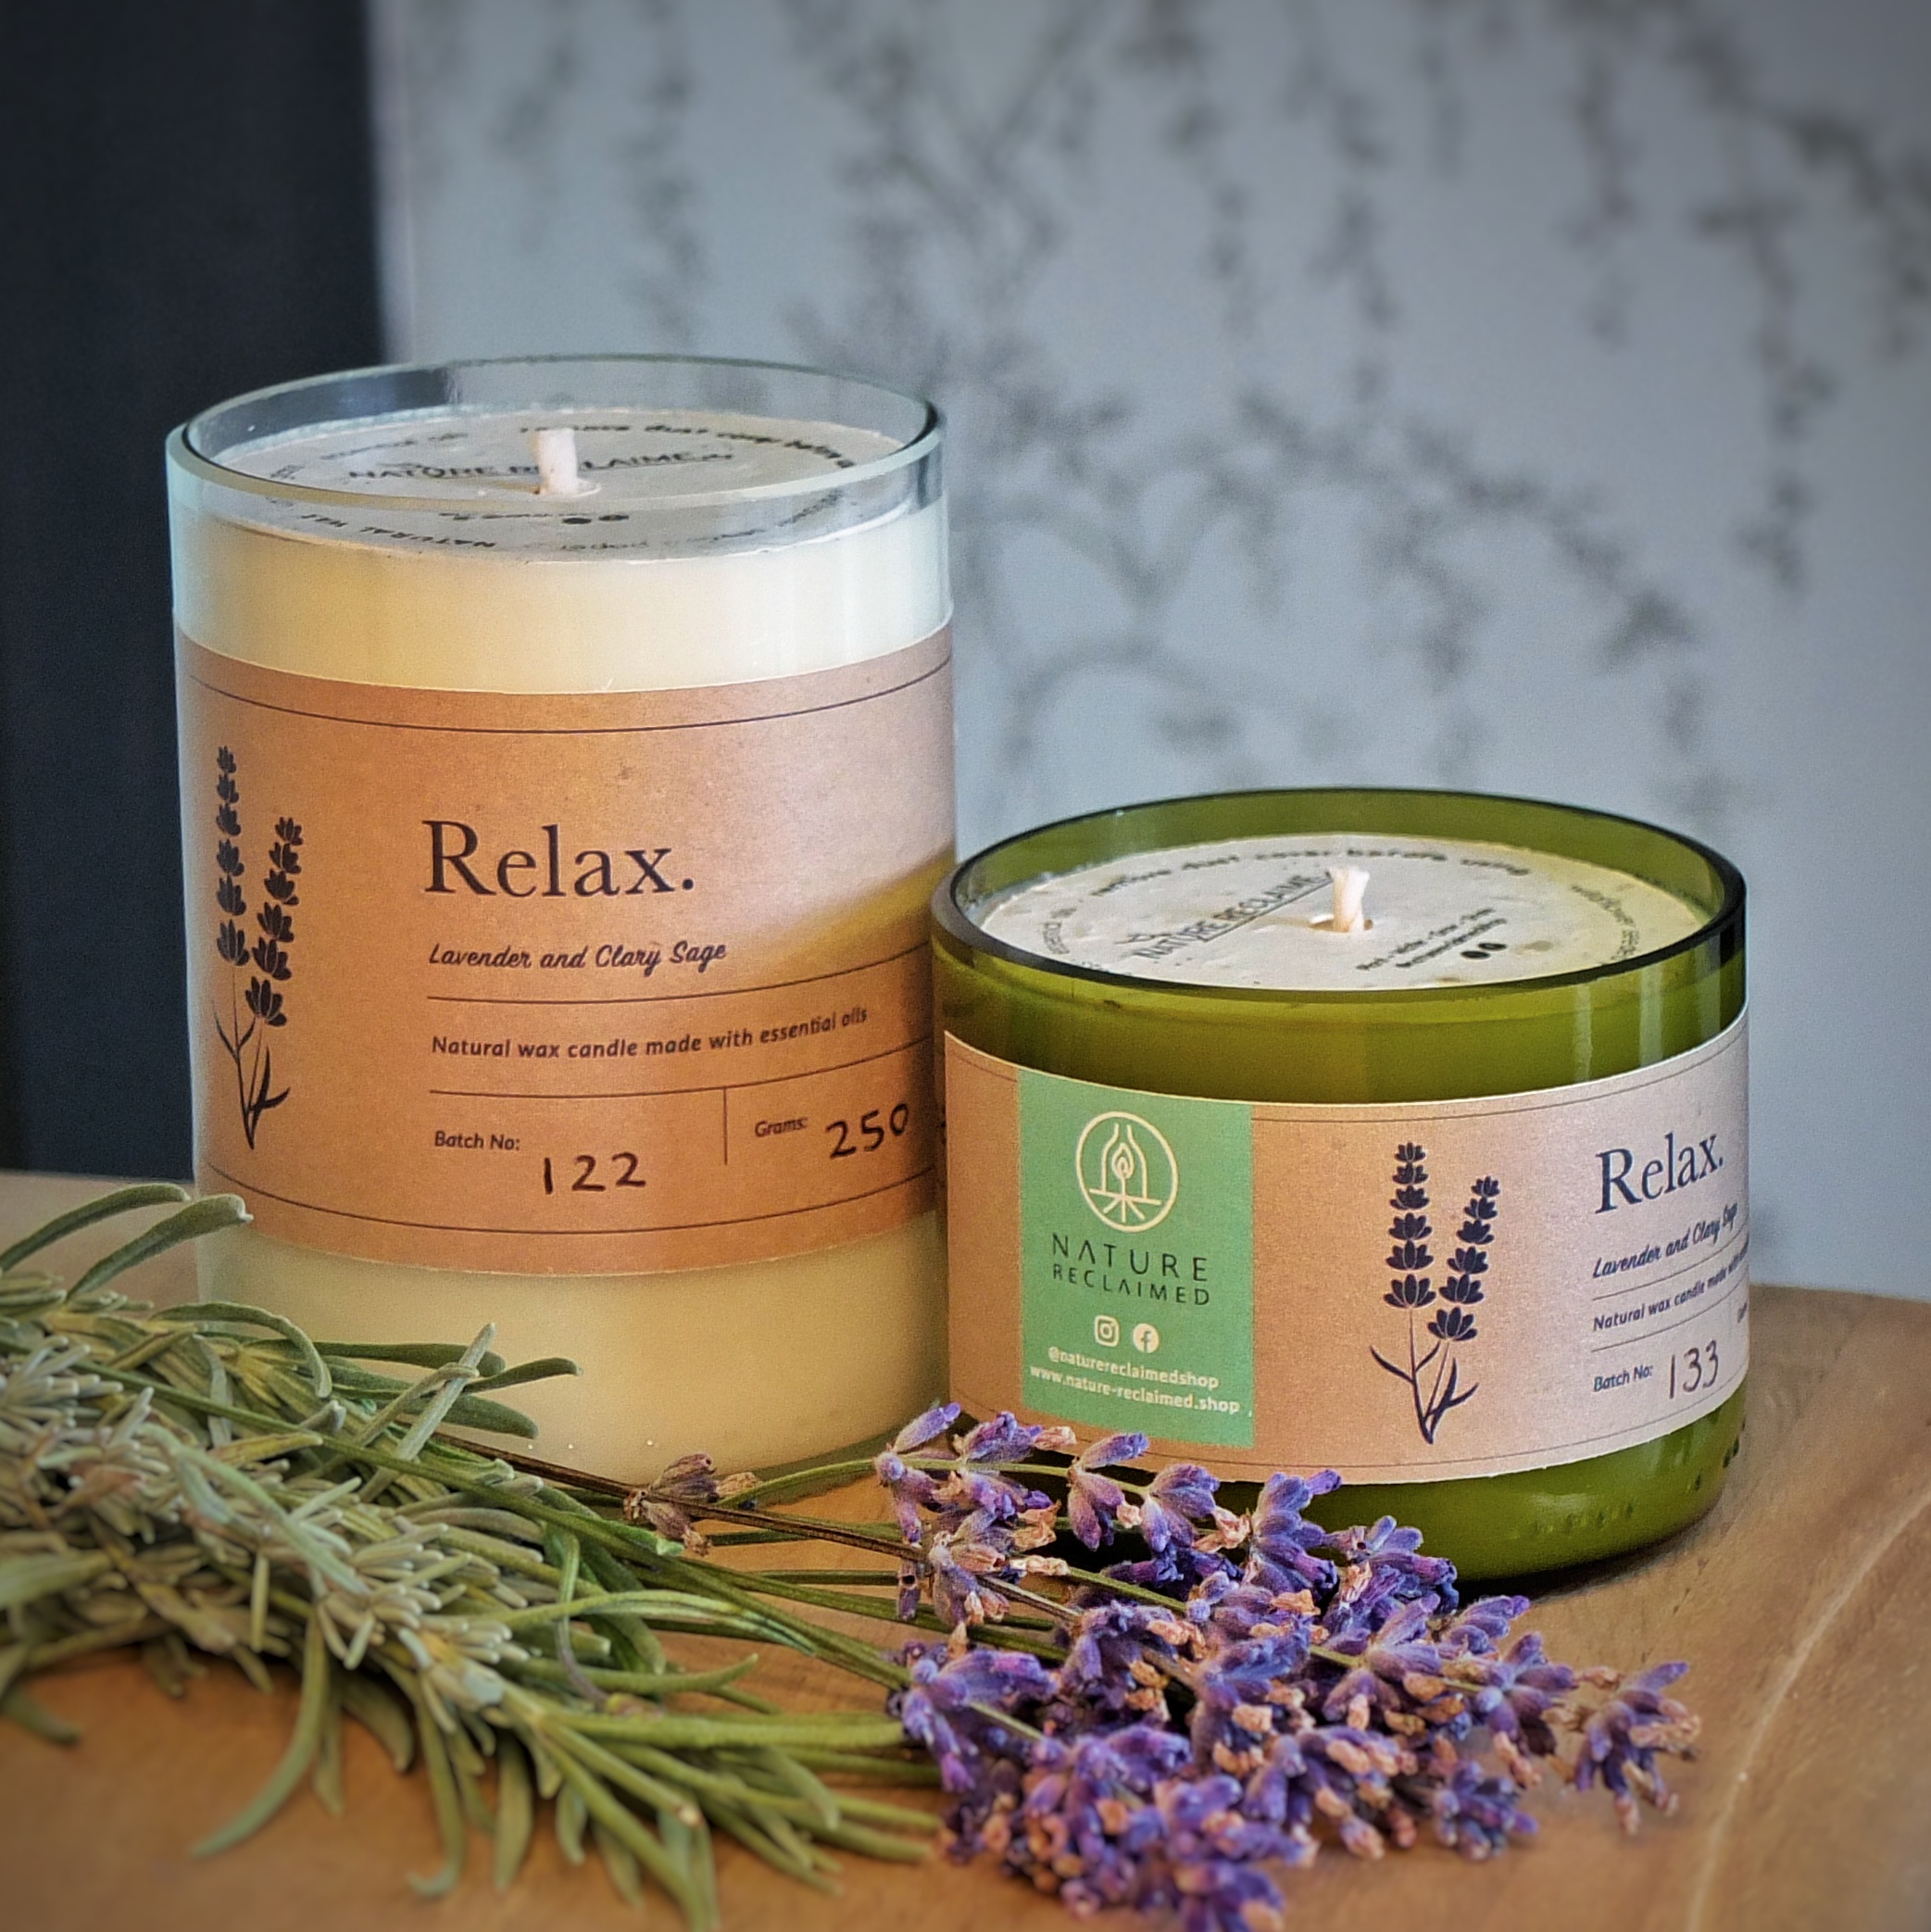 Image of two candles made from upcycled bottles with a sprig of lavender laid in front